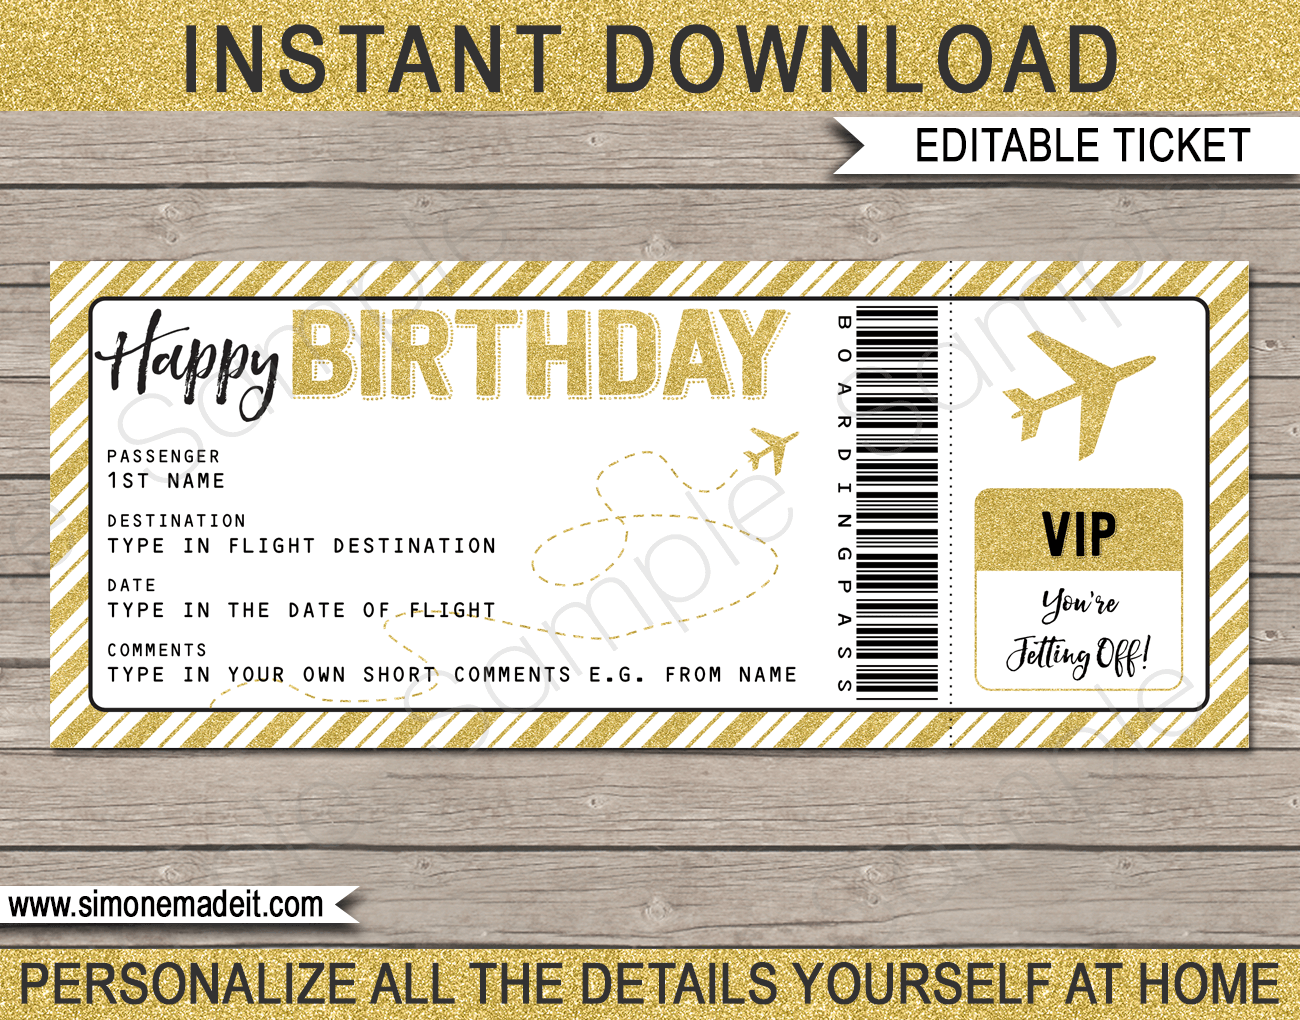 birthday-boarding-pass-gift-ticket-template-surprise-plane-trip-reveal